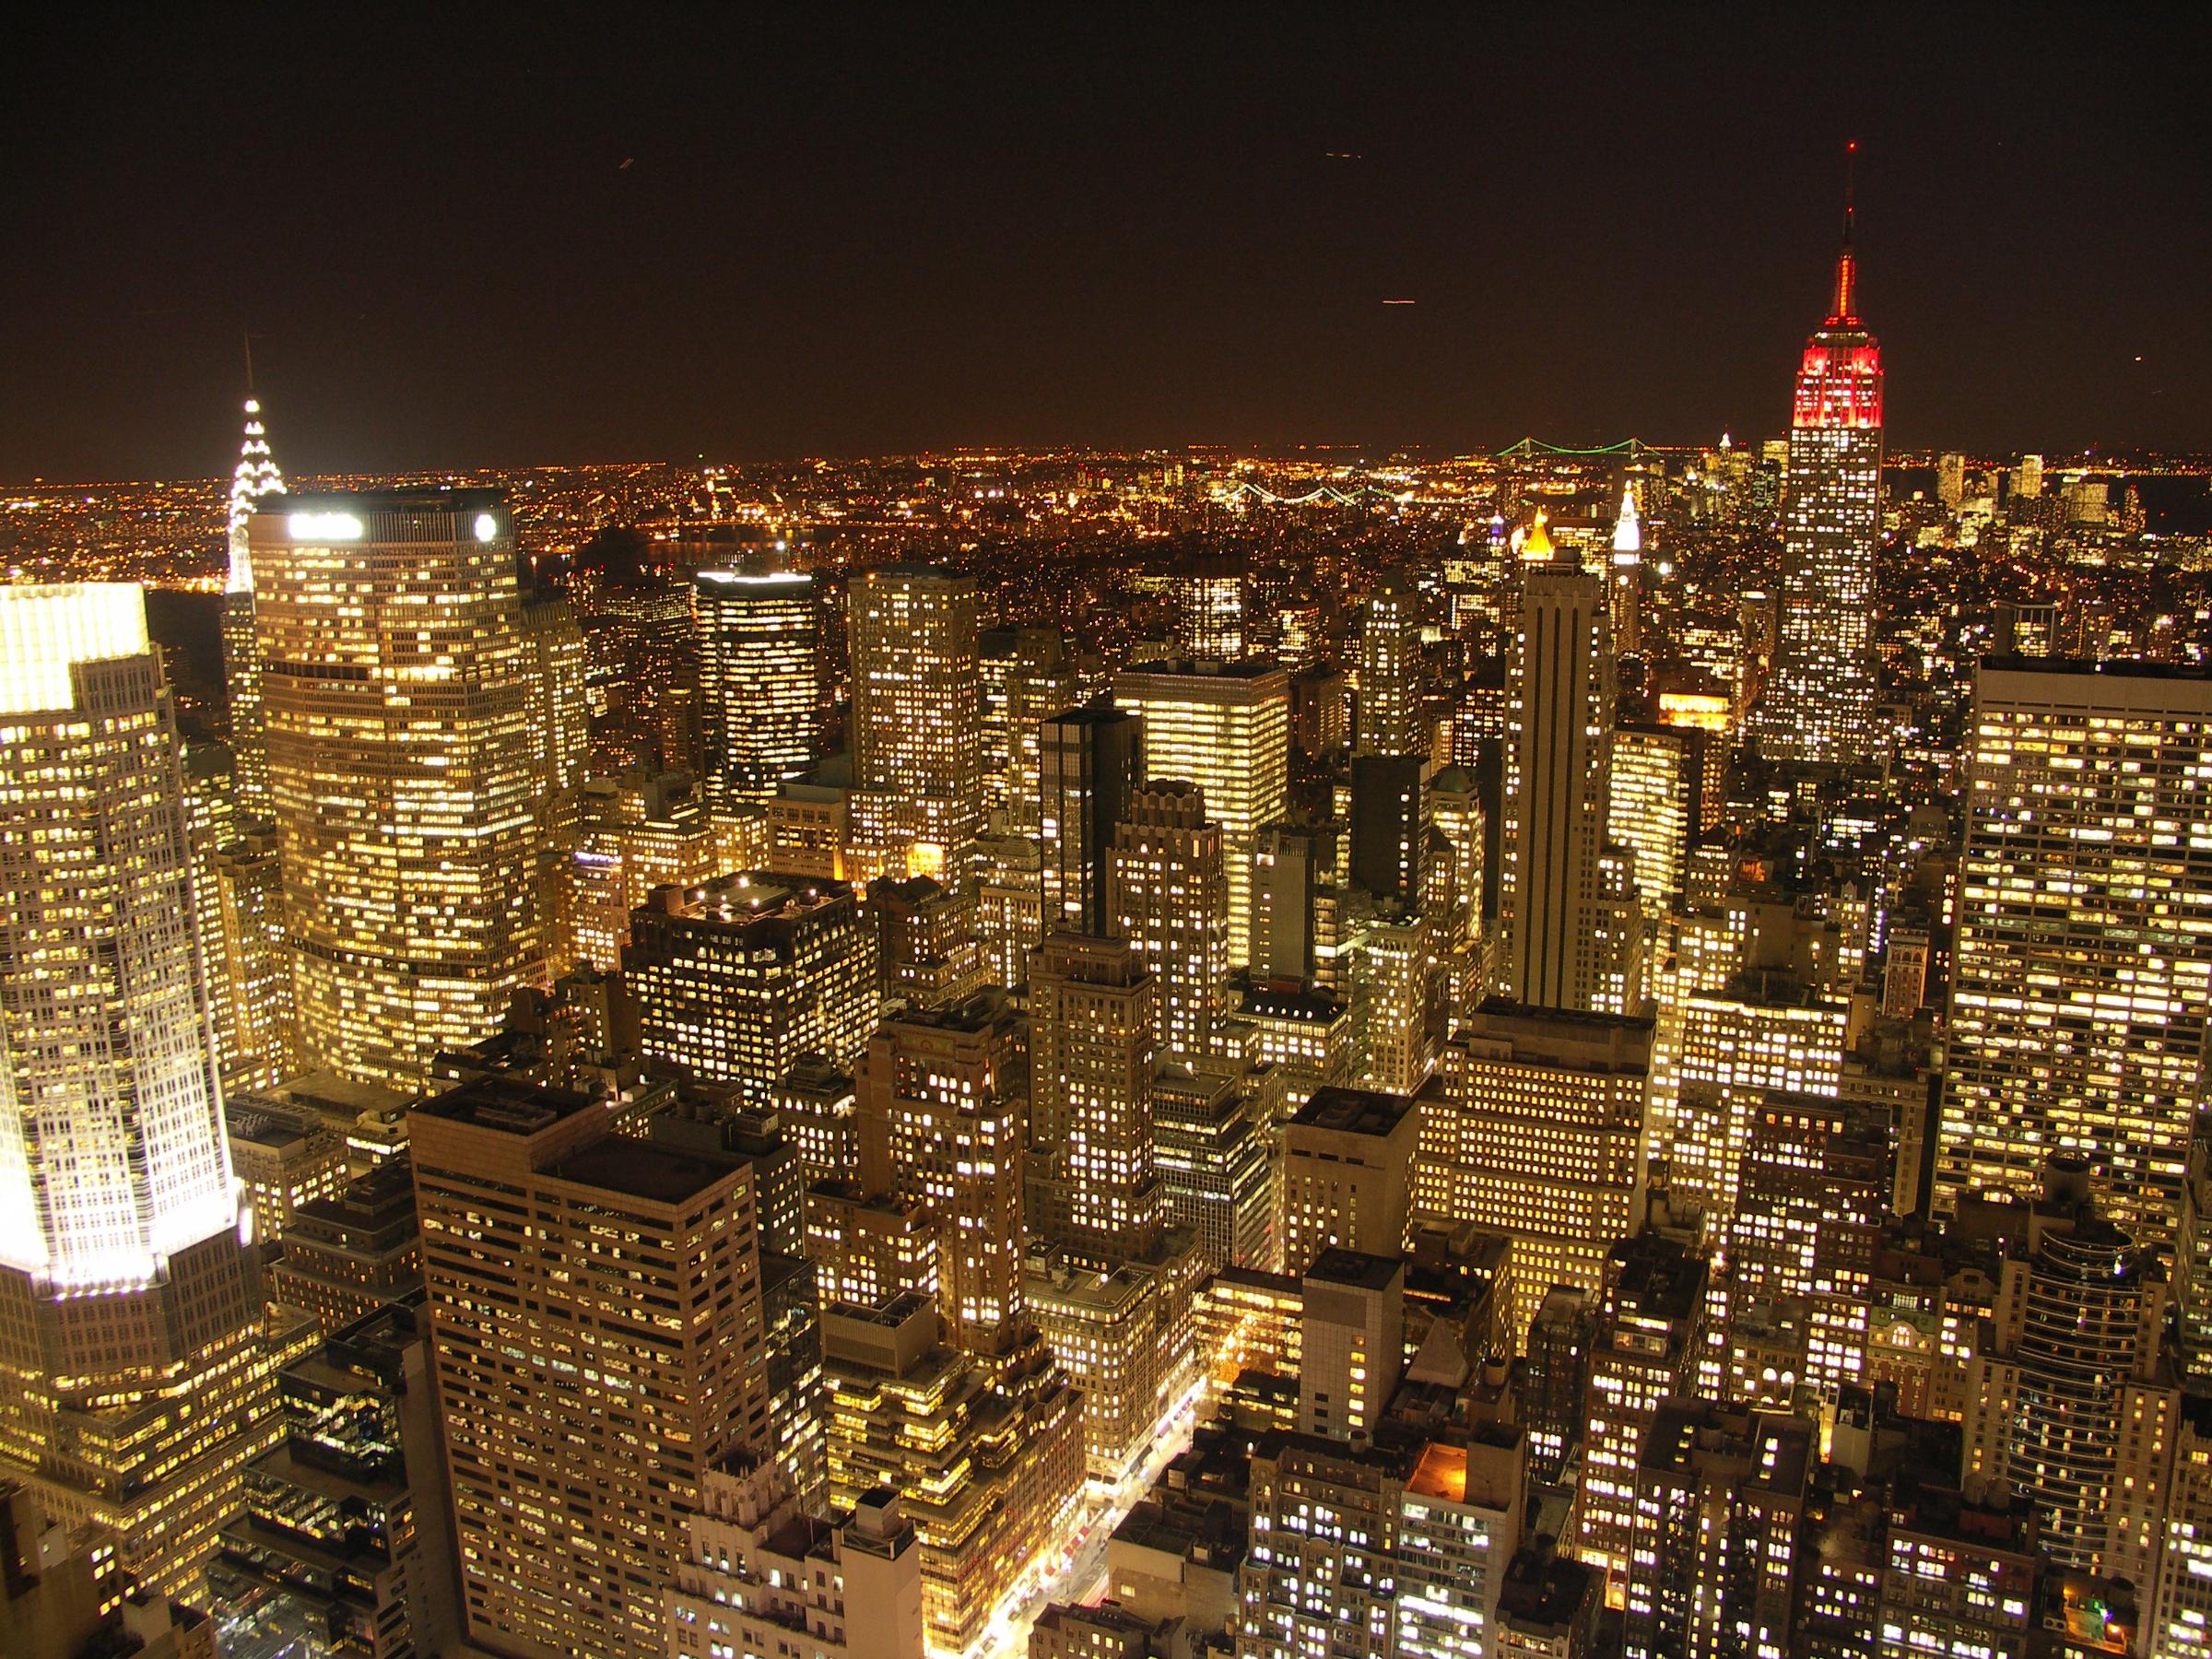 New York City skyline at night with bright lights and tall buildings.